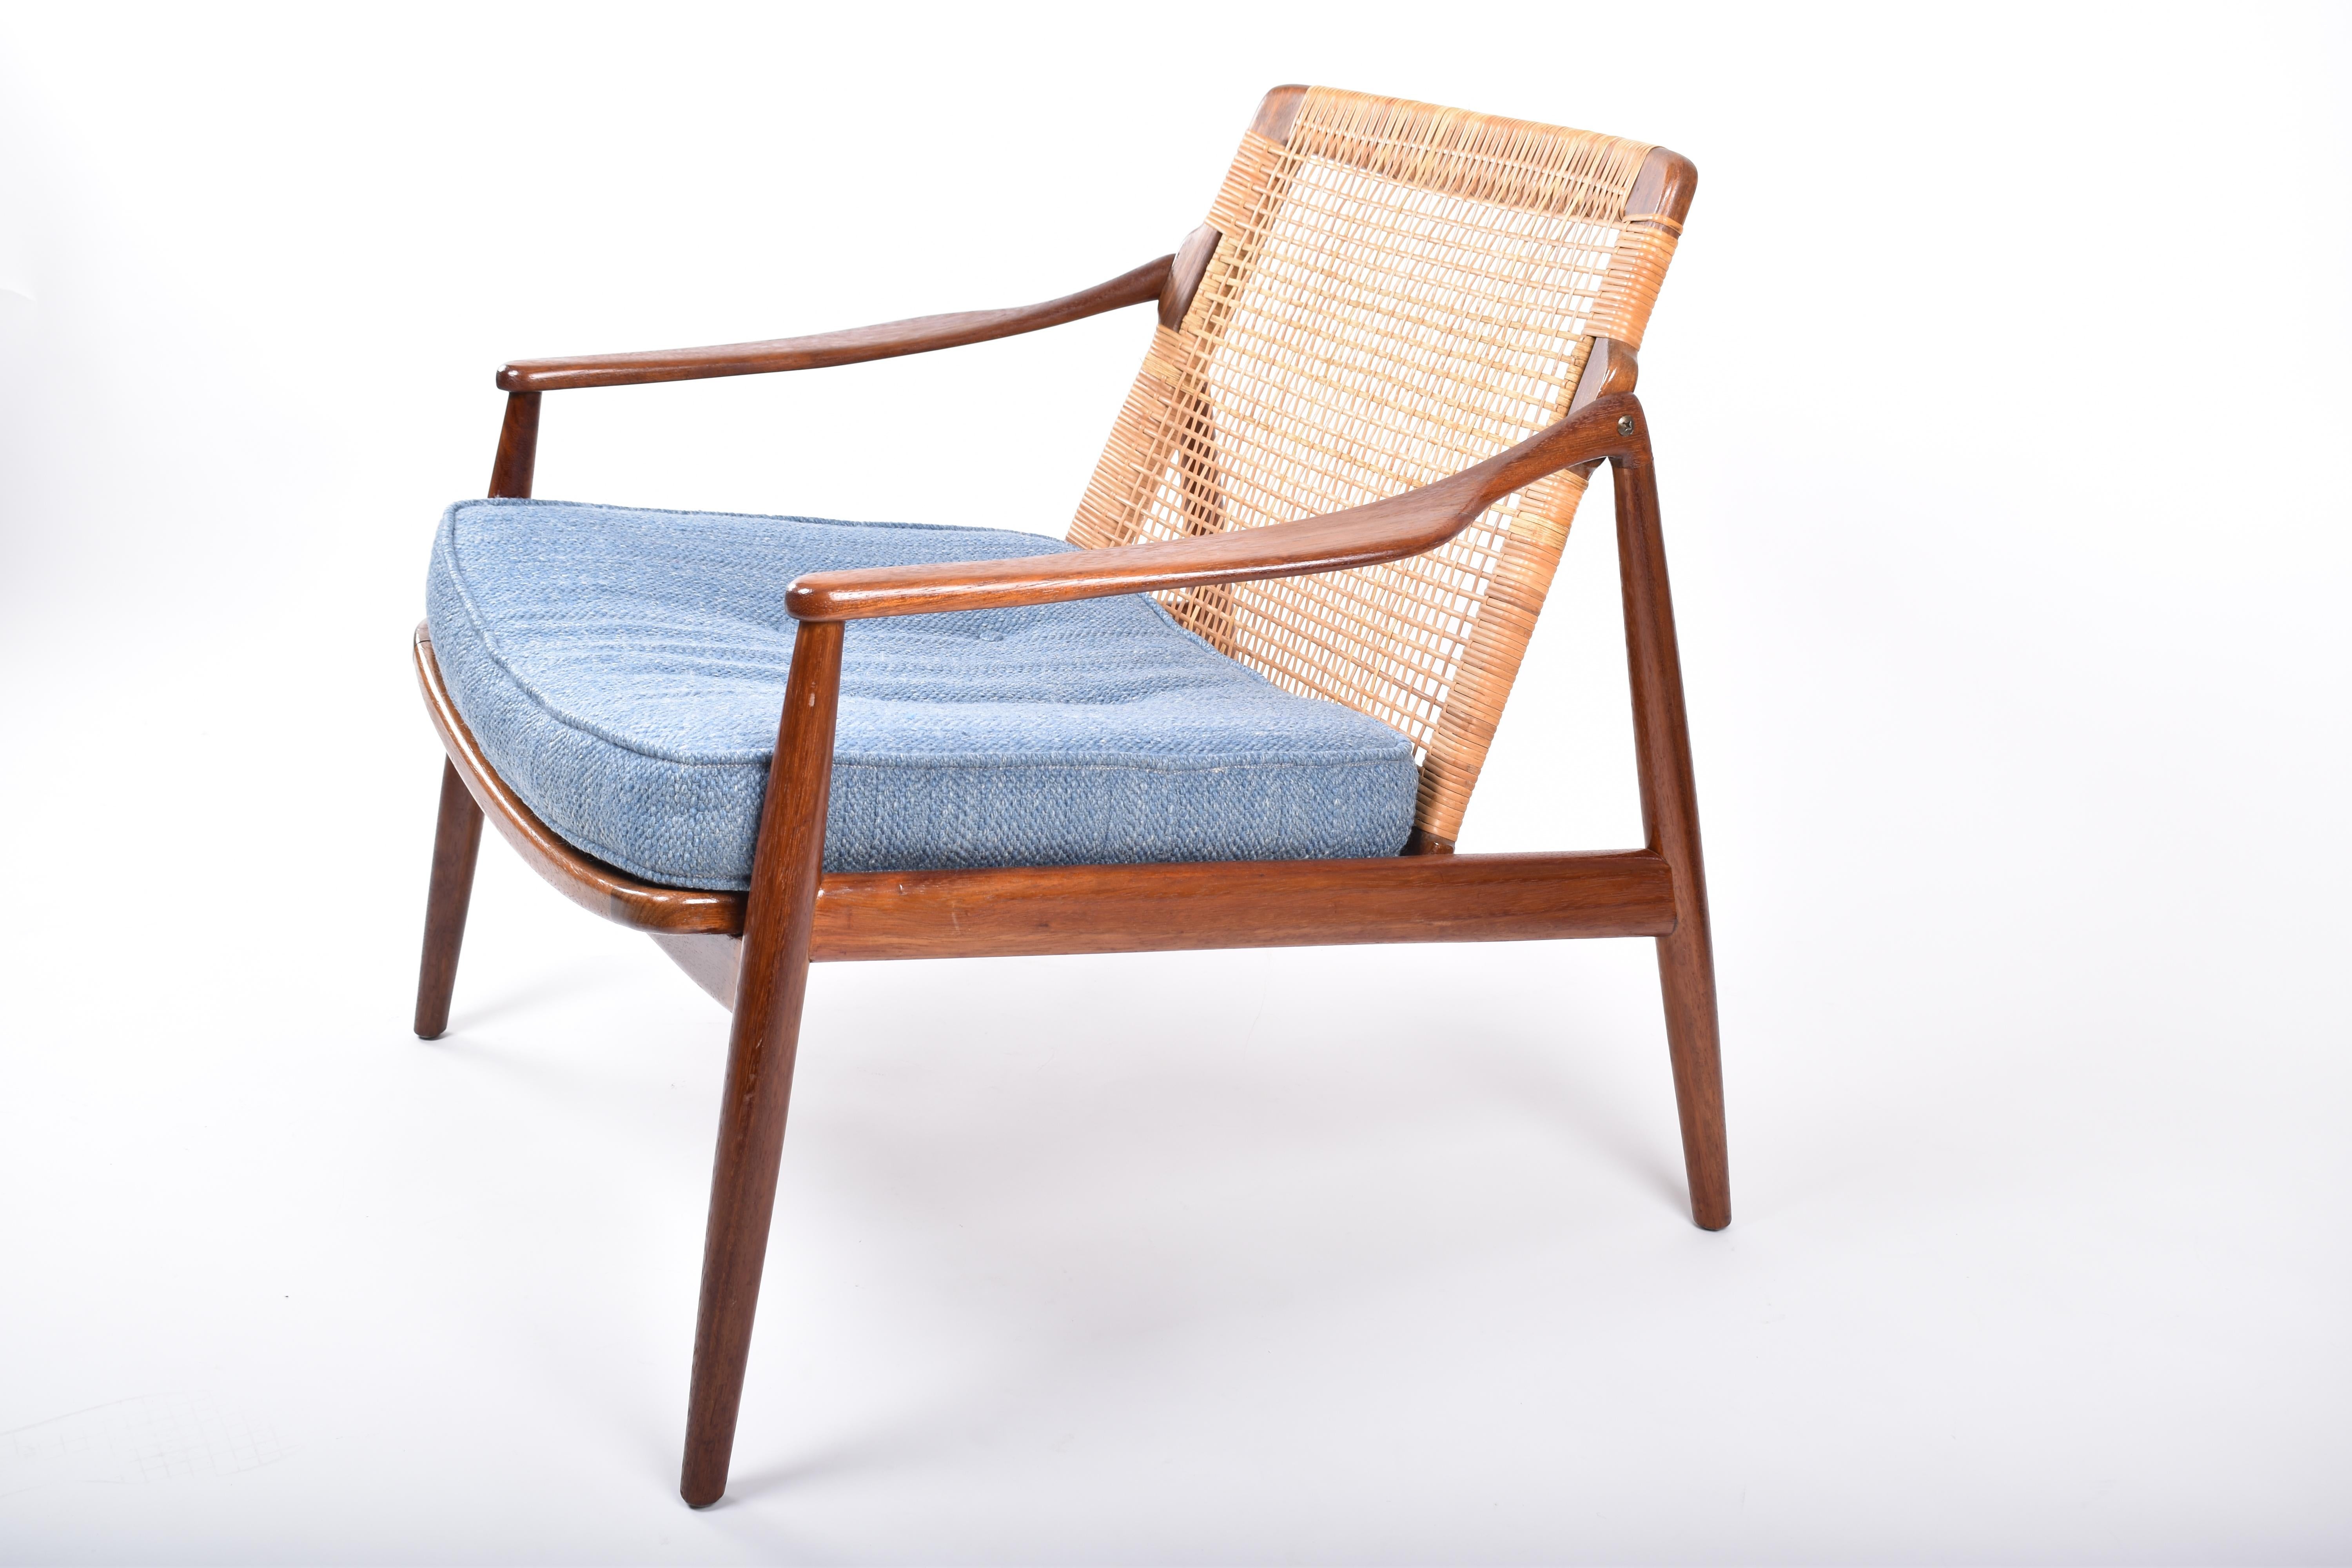 Set of two mid-century modern lounge chairs, designed by Hartmut Lohmeyer and made by Wilkhahn, Germany, in early 1960.
Rare set, made of solid teak and woven cane. The cane work is new and ready for intensive use. The wood had a refinishing and